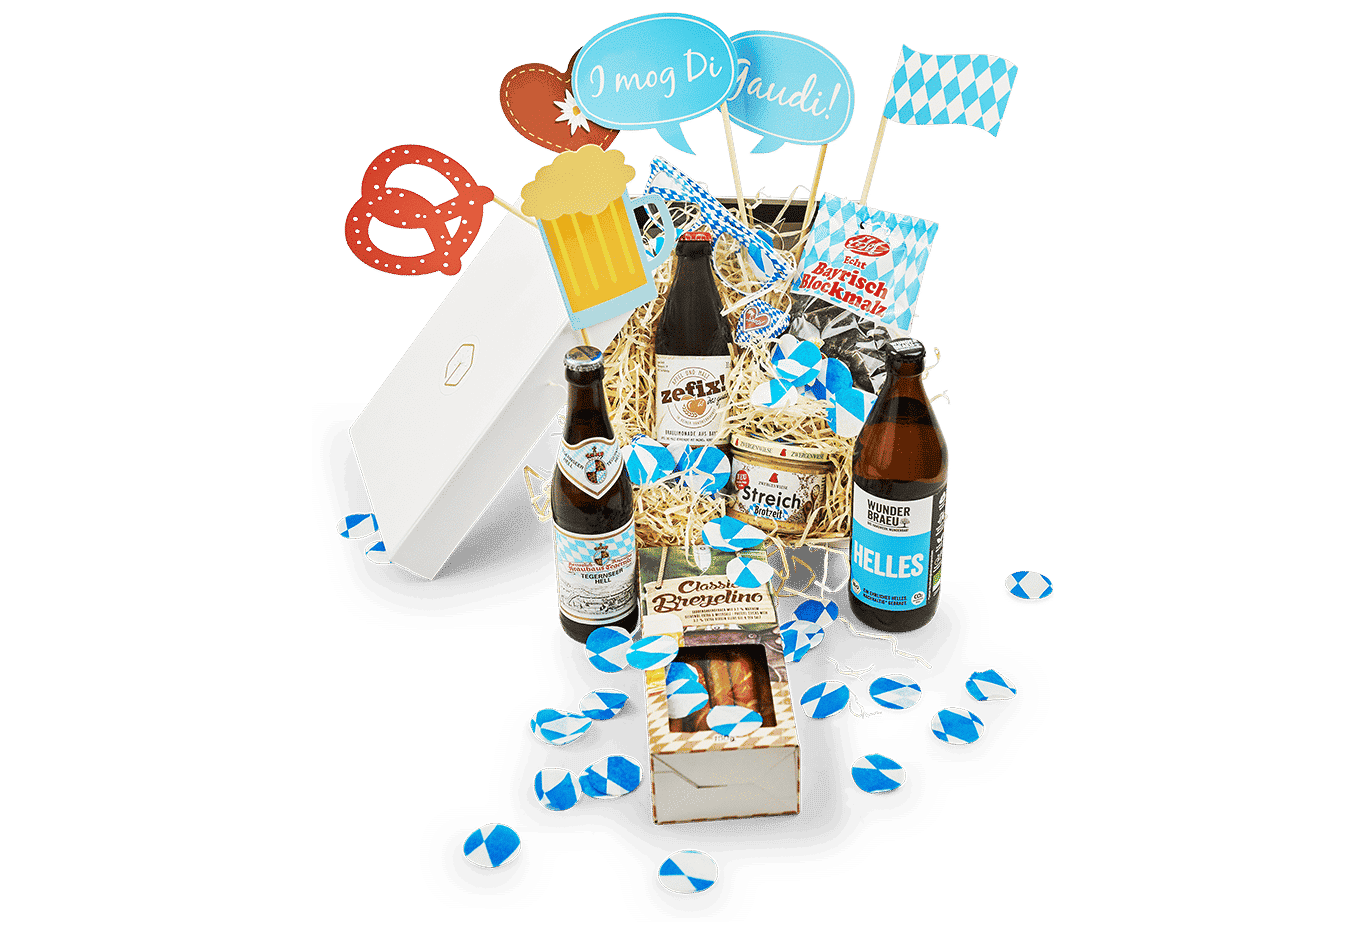 The Oktoberfest Box brings the Oktoberfest to your home! It contains a Helles from Wunderbraeu, a Tegernseer Hell, the unique brew lemonade zefix! from Bavaria, Bavarian block malt, Brezelinos, delicious spread made from onions and caraway seeds, blue and white party glasses and themed Oktoberfest photo props. The filler is mixed with blue and white confetti.